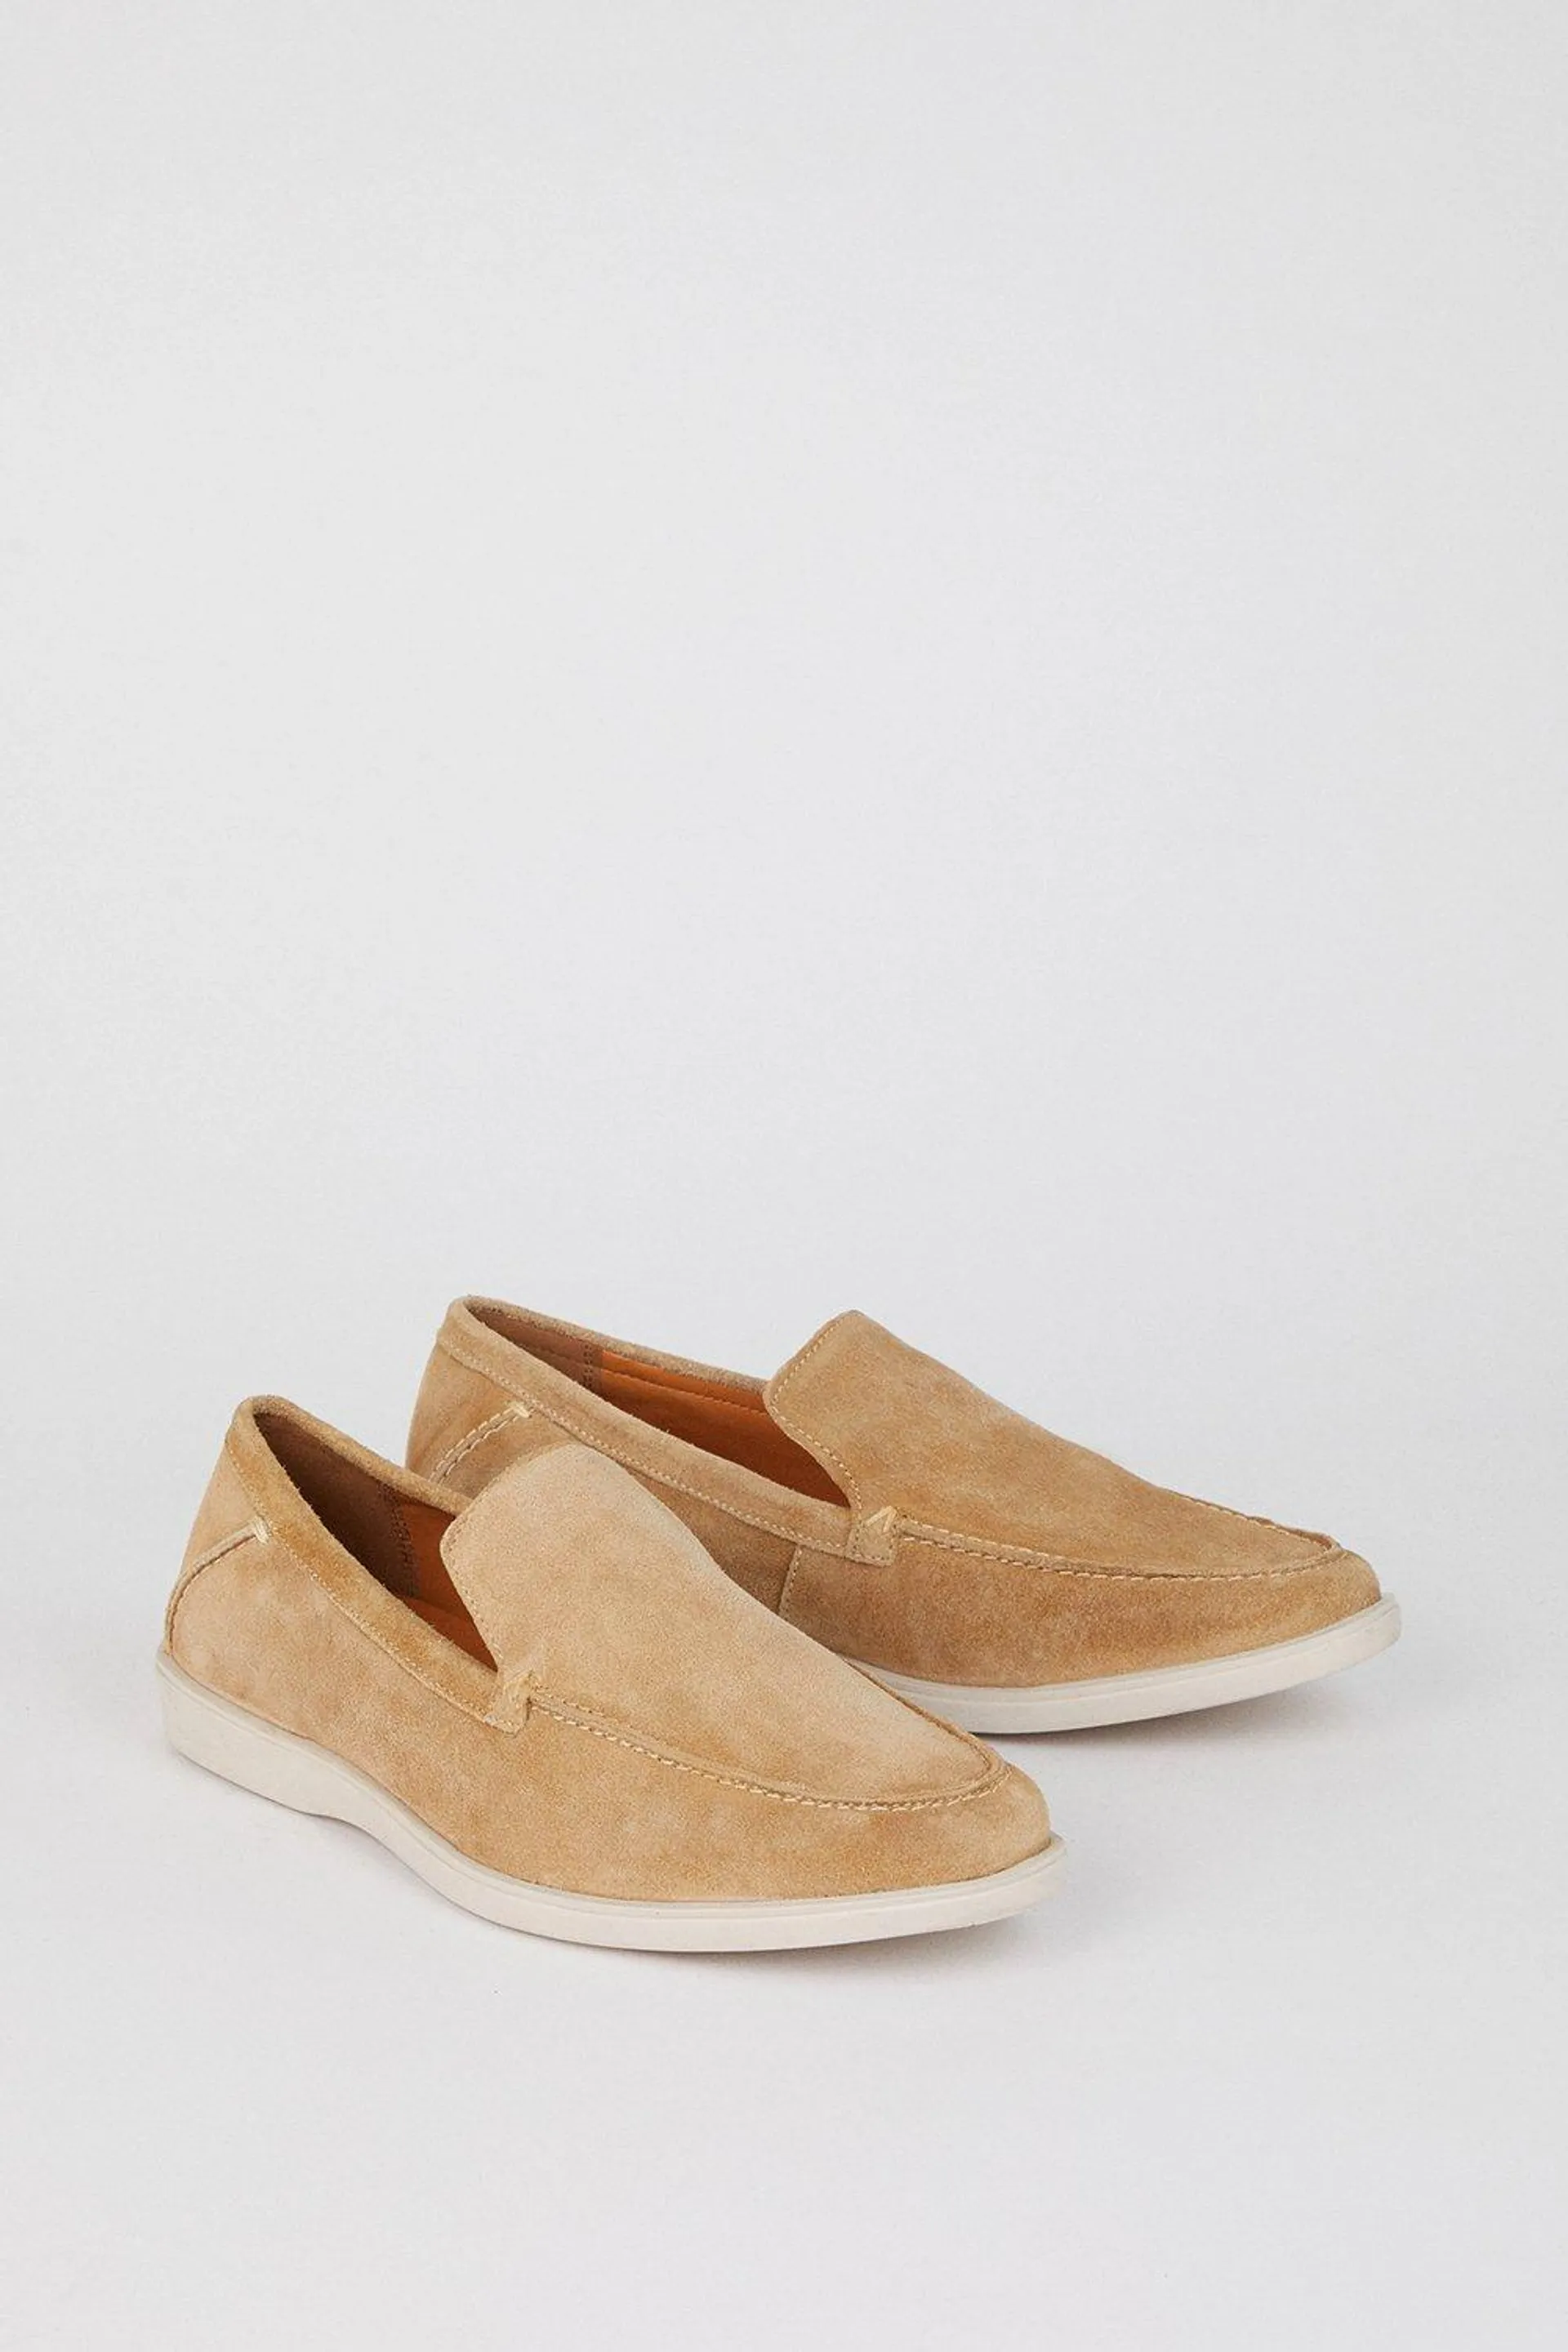 Stone Wide Fit Suede Slip On Shoes